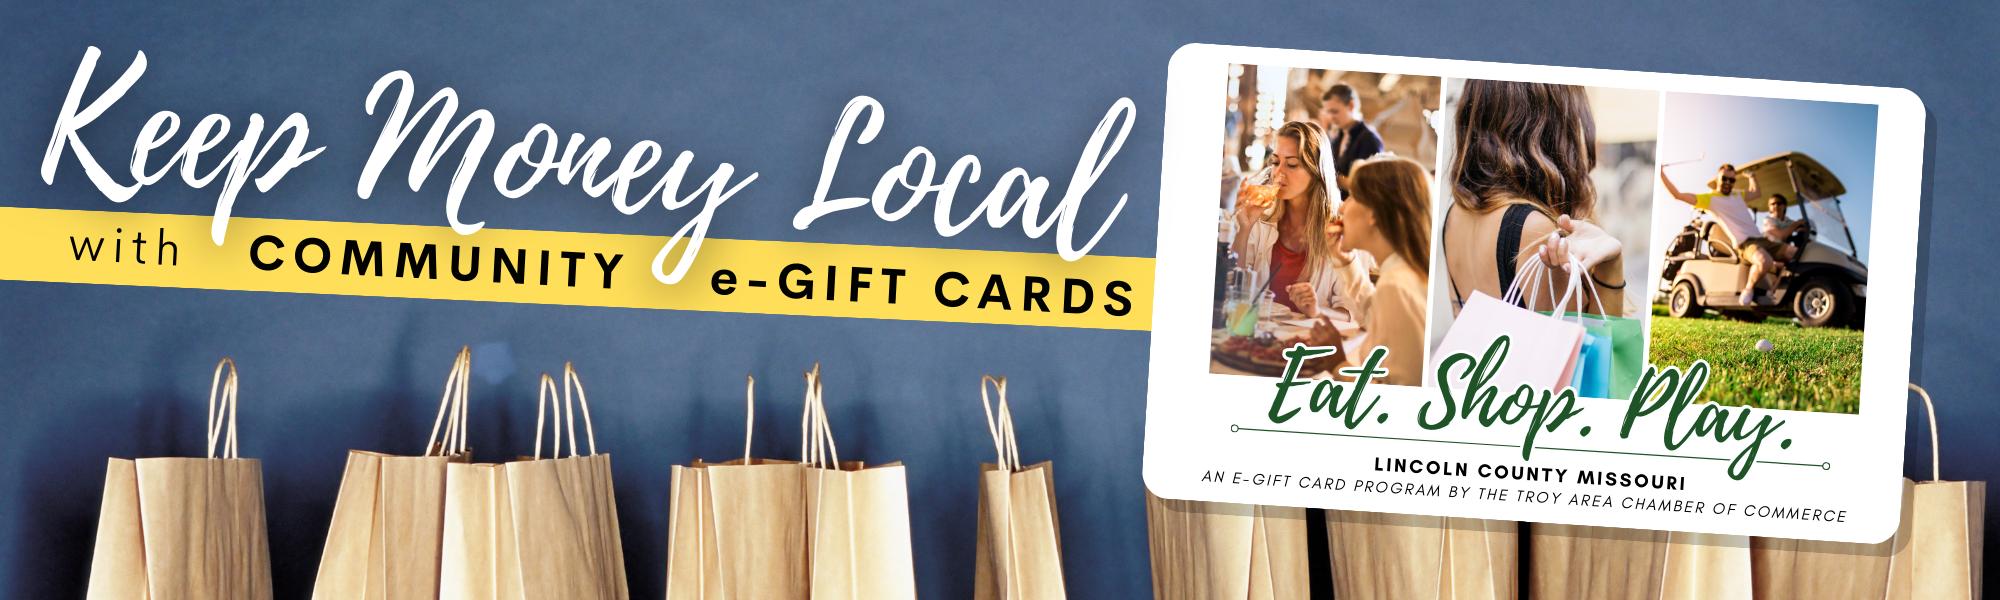 Community Gift Card - Website Image (2000 × 600 px)